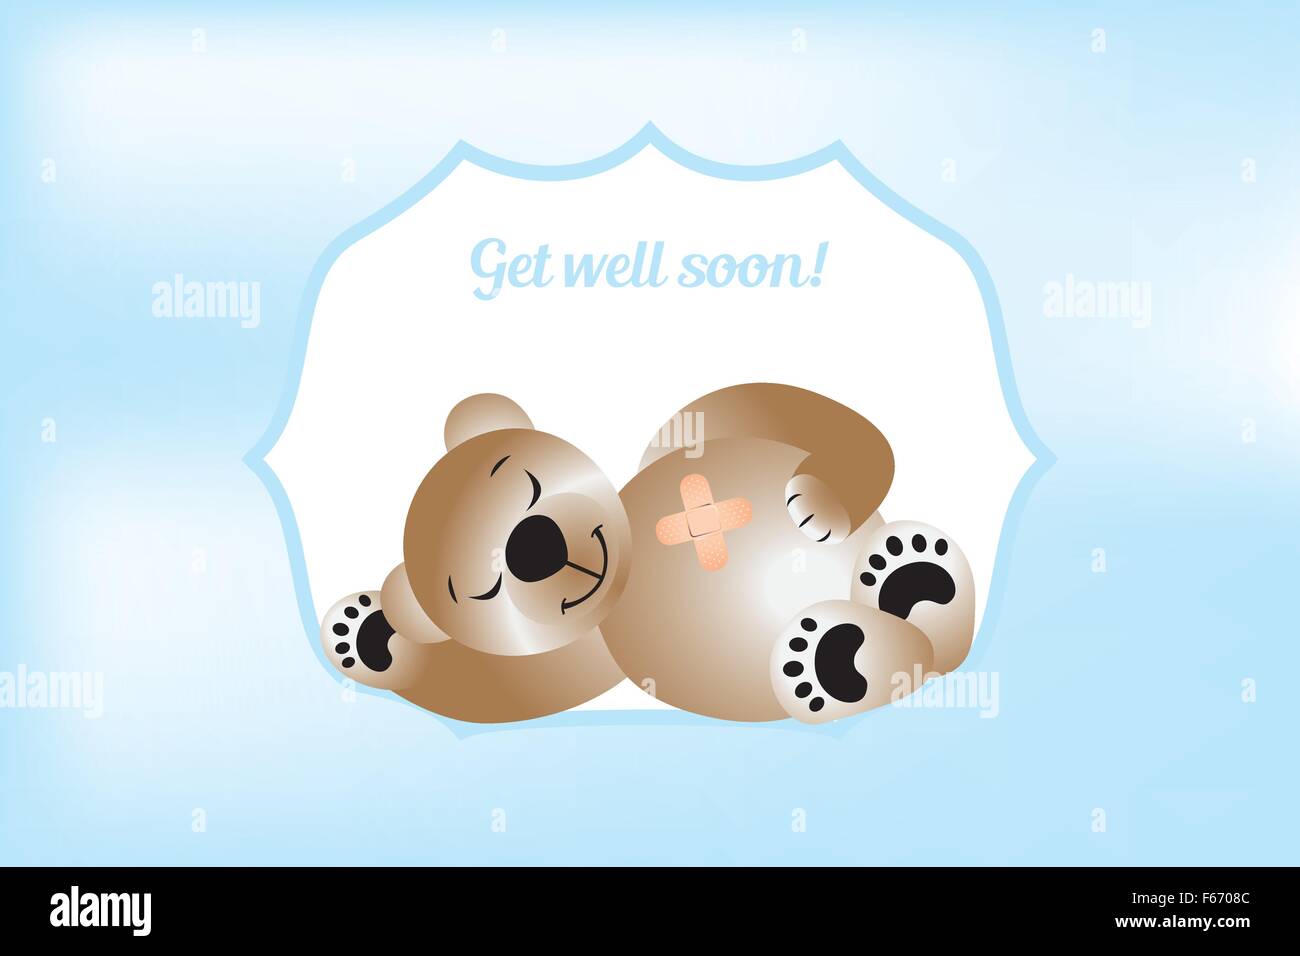 Get will soon card with bear - vector illustration Stock Vector